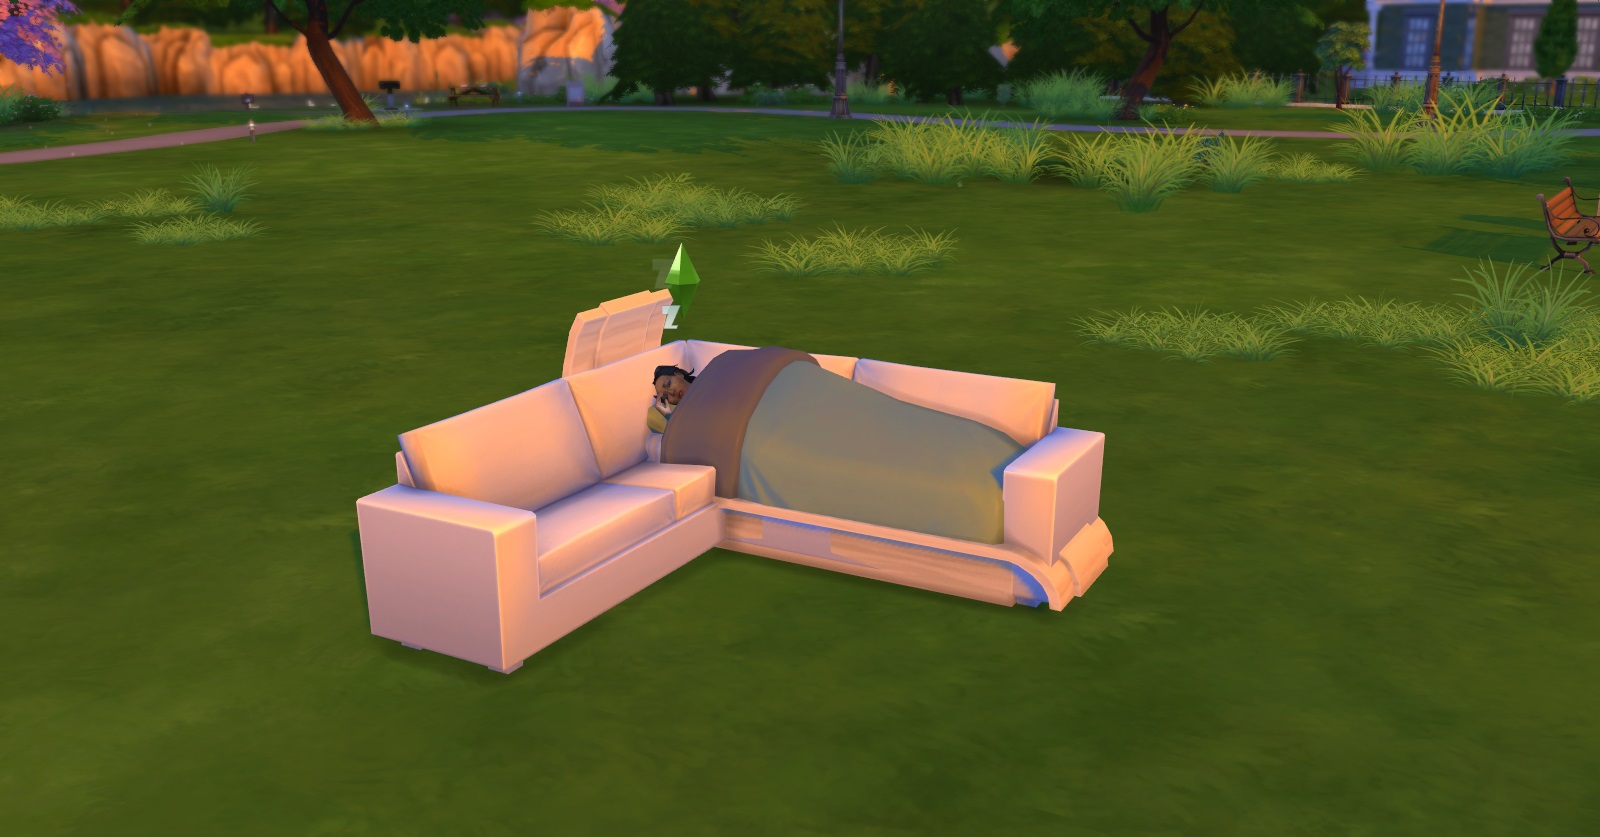 Sims objects. MOVEOBJECTS on симс 2. MOVEOBJECTS on для симс 4. Симс 4 почтовый ящик. BB MOVEOBJECTS on симс.